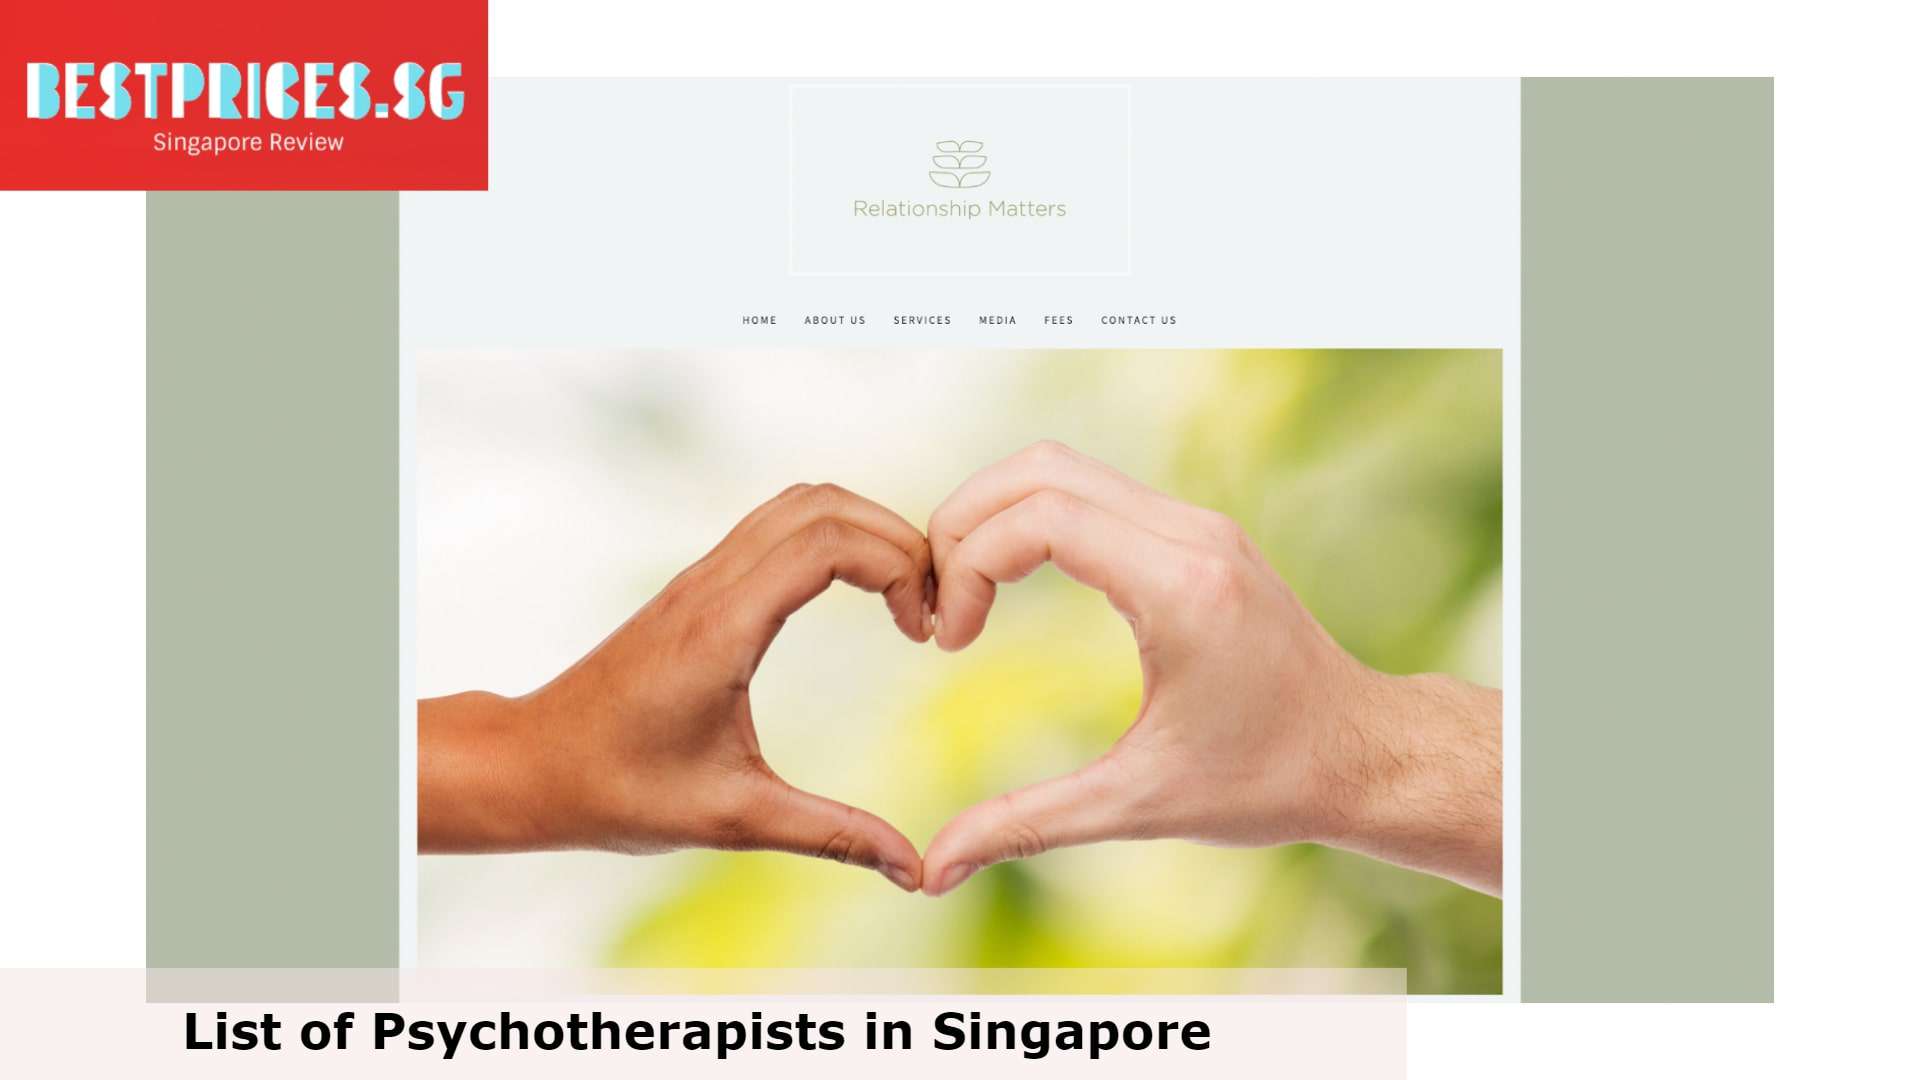 Relationship Matters - Psychotherapist Singapore, How do I become a psychotherapist in Singapore?, What is the difference between a psychologist and a psychotherapist?, Is psychotherapy regulated in Singapore?, Is it worth seeing a psychotherapist?, Who should visit a Psychotherapist?, What is Psychotherapy?, Best psychologist in Singapore, How much does a psychologist cost Singapore?, Is psychologist a doctor in Singapore?, Who is the best psychologist?, list of psychologists in singapore, psychologist in singapore salary, psychologist near me, 
private psychologist singapore, affordable psychologist singapore, 